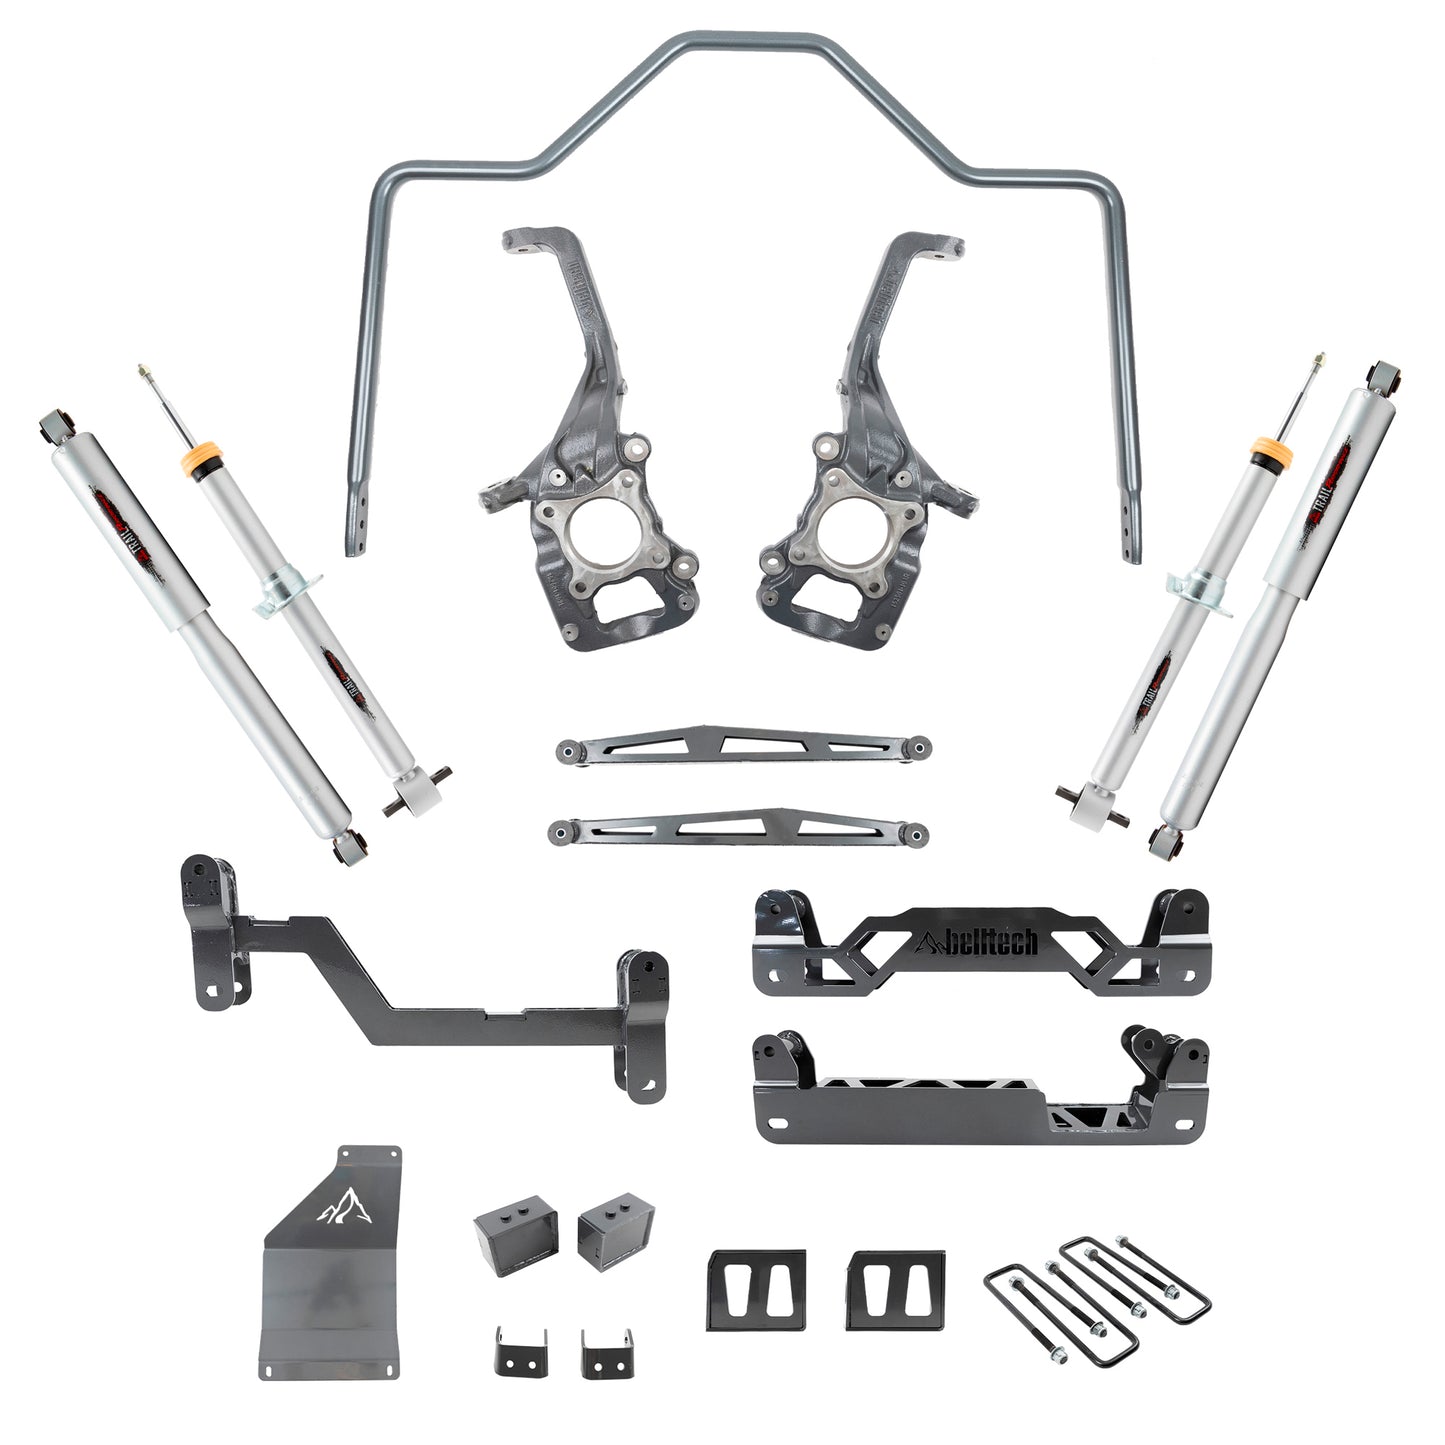 BELLTECH 152501TPS LIFT KIT 6in.-7in. Lift Kit Inc. Front and Rear Trail Performance Struts/Shocks 2015-2020 Ford F150 4WD (All Cabs) Short Bed 6in.-7in. Lift Kit W/ Trail Performance Shocks